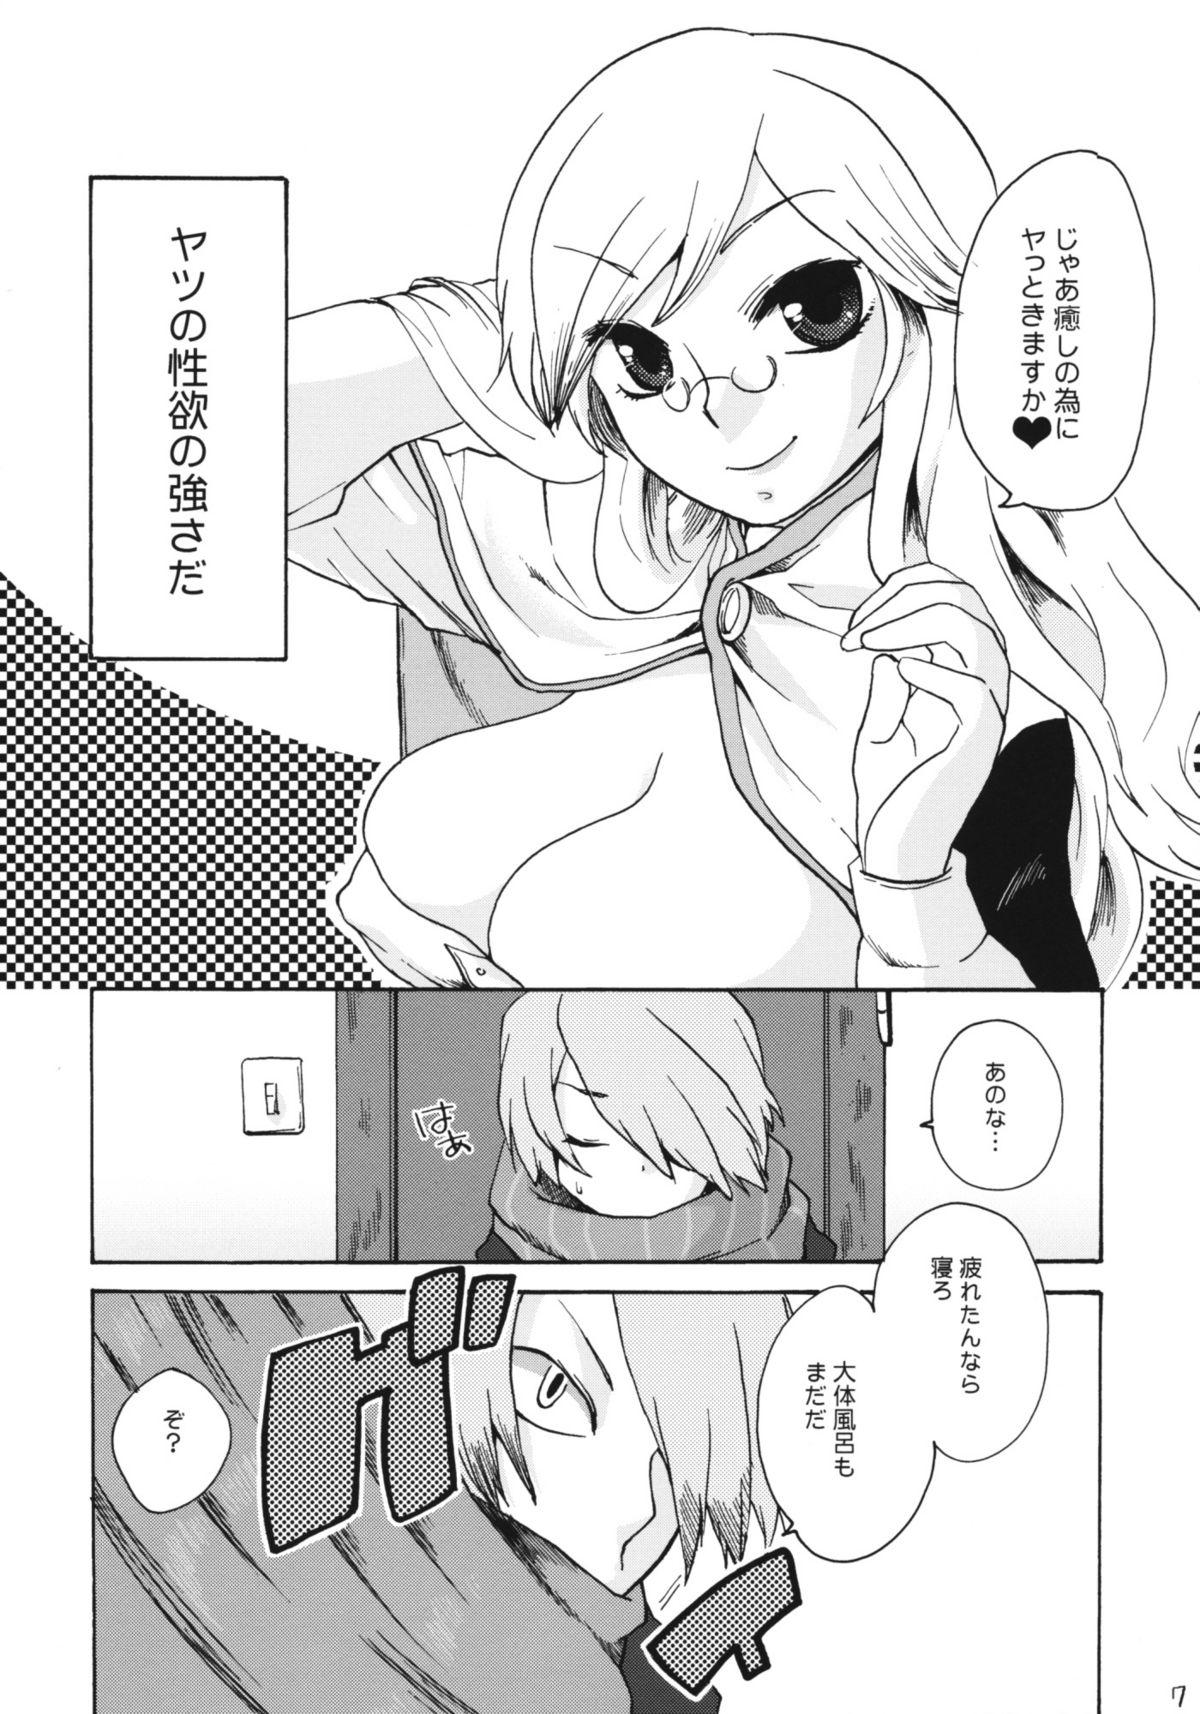 Hugetits In You And Me - 7th dragon Tgirls - Page 6